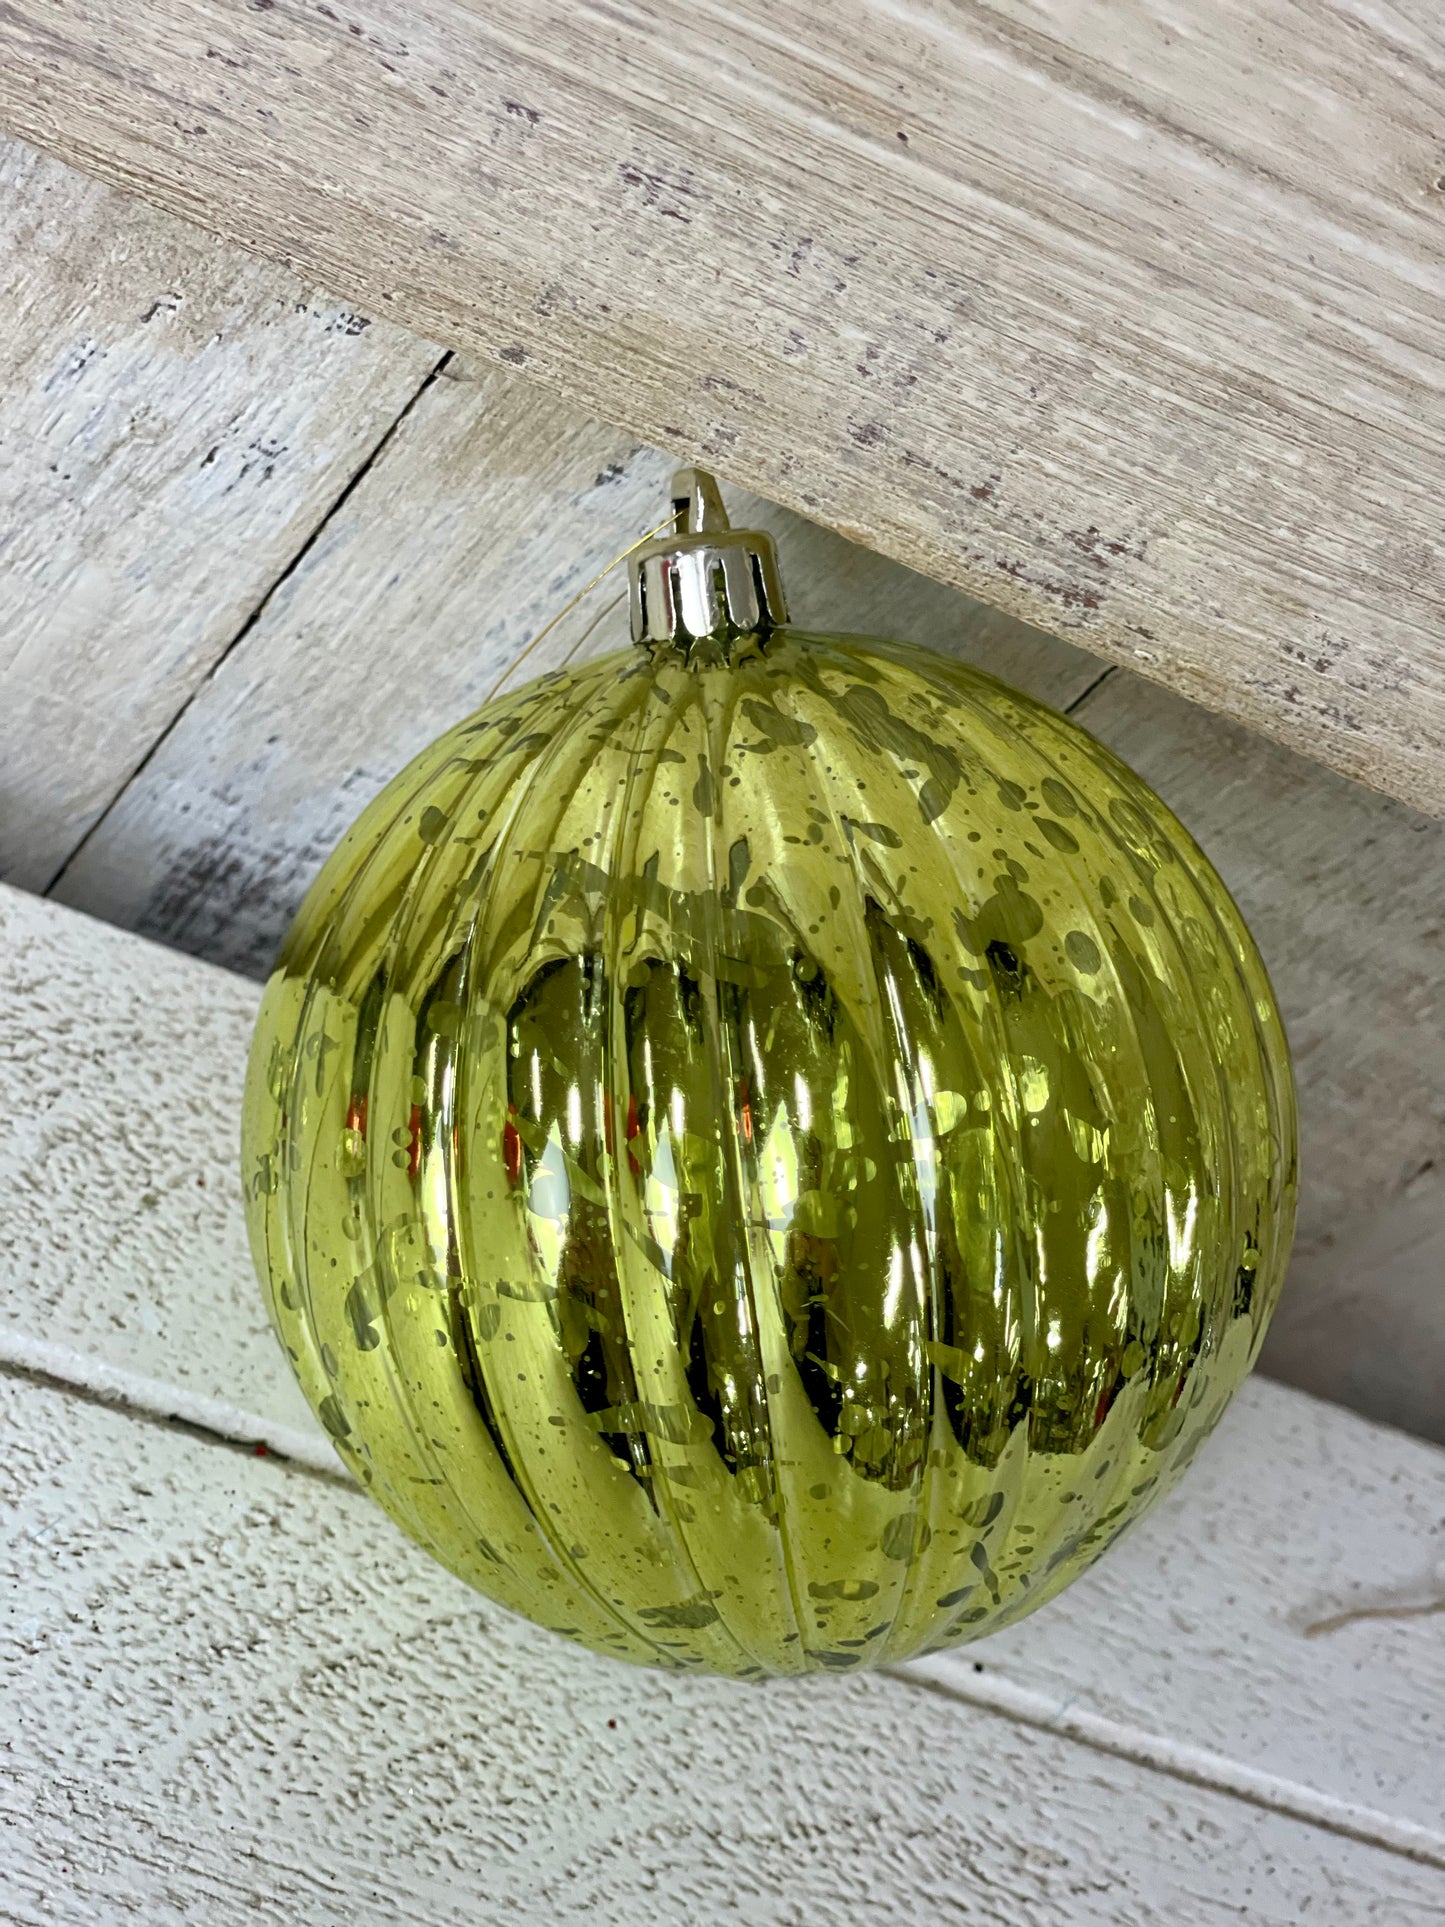 4 Inch Antique Look Shiny Lime Green Vertical Striped Ornament Ball